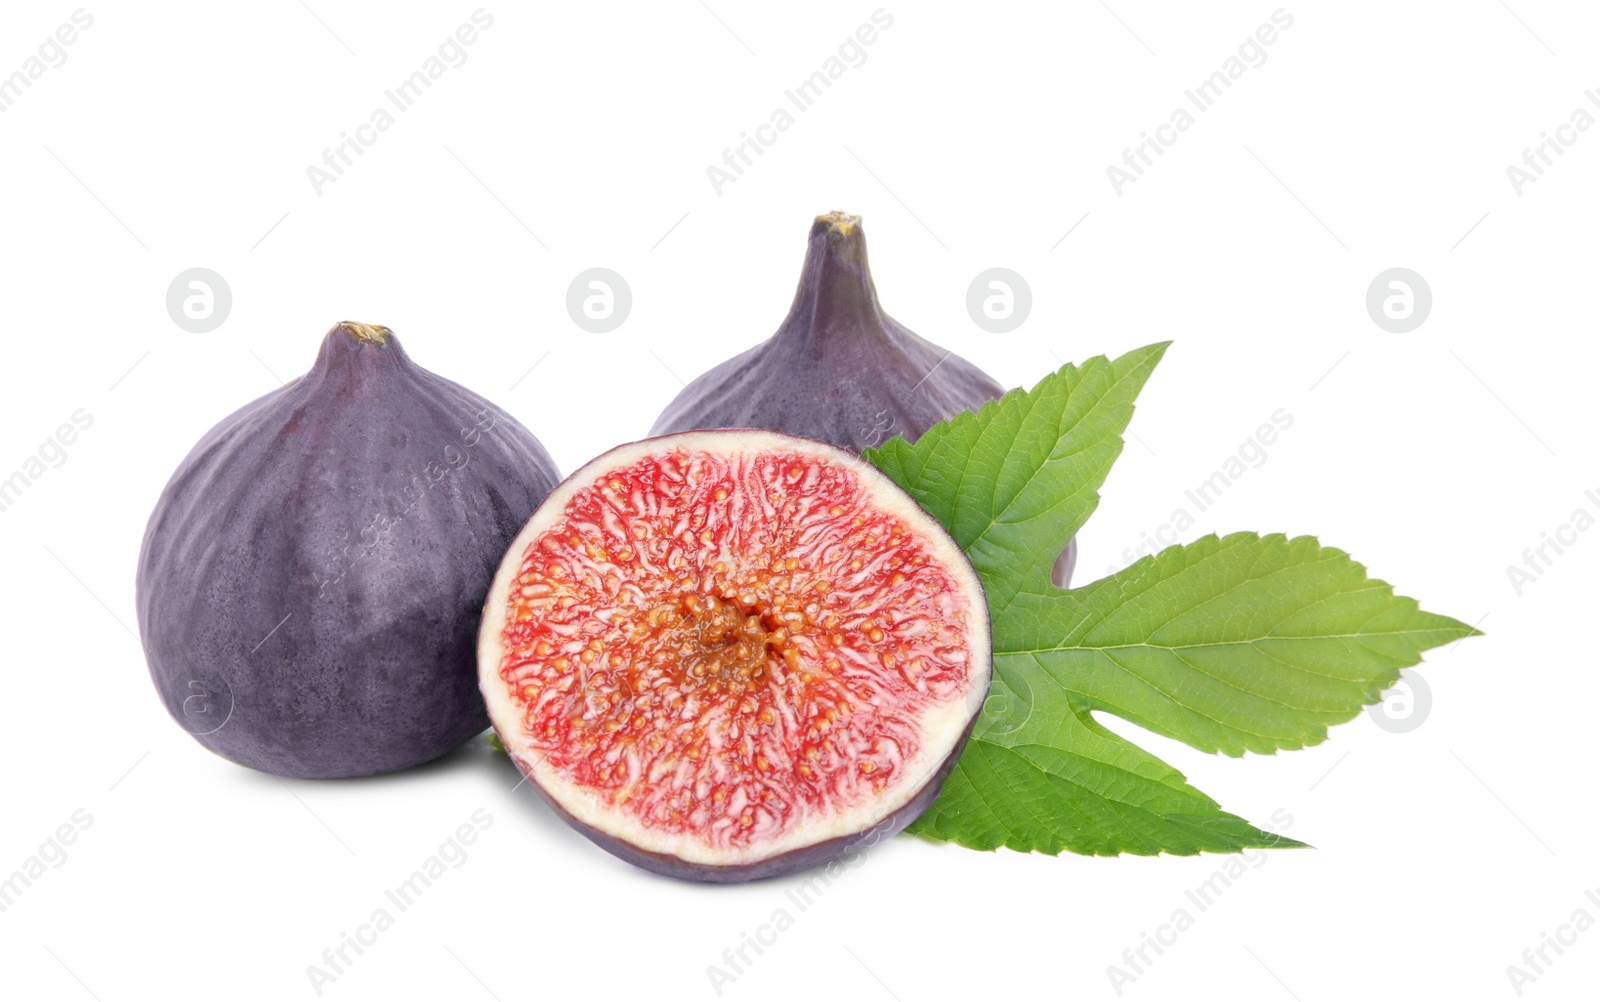 Photo of Whole and cut fresh ripe figs with green leaf isolated on white